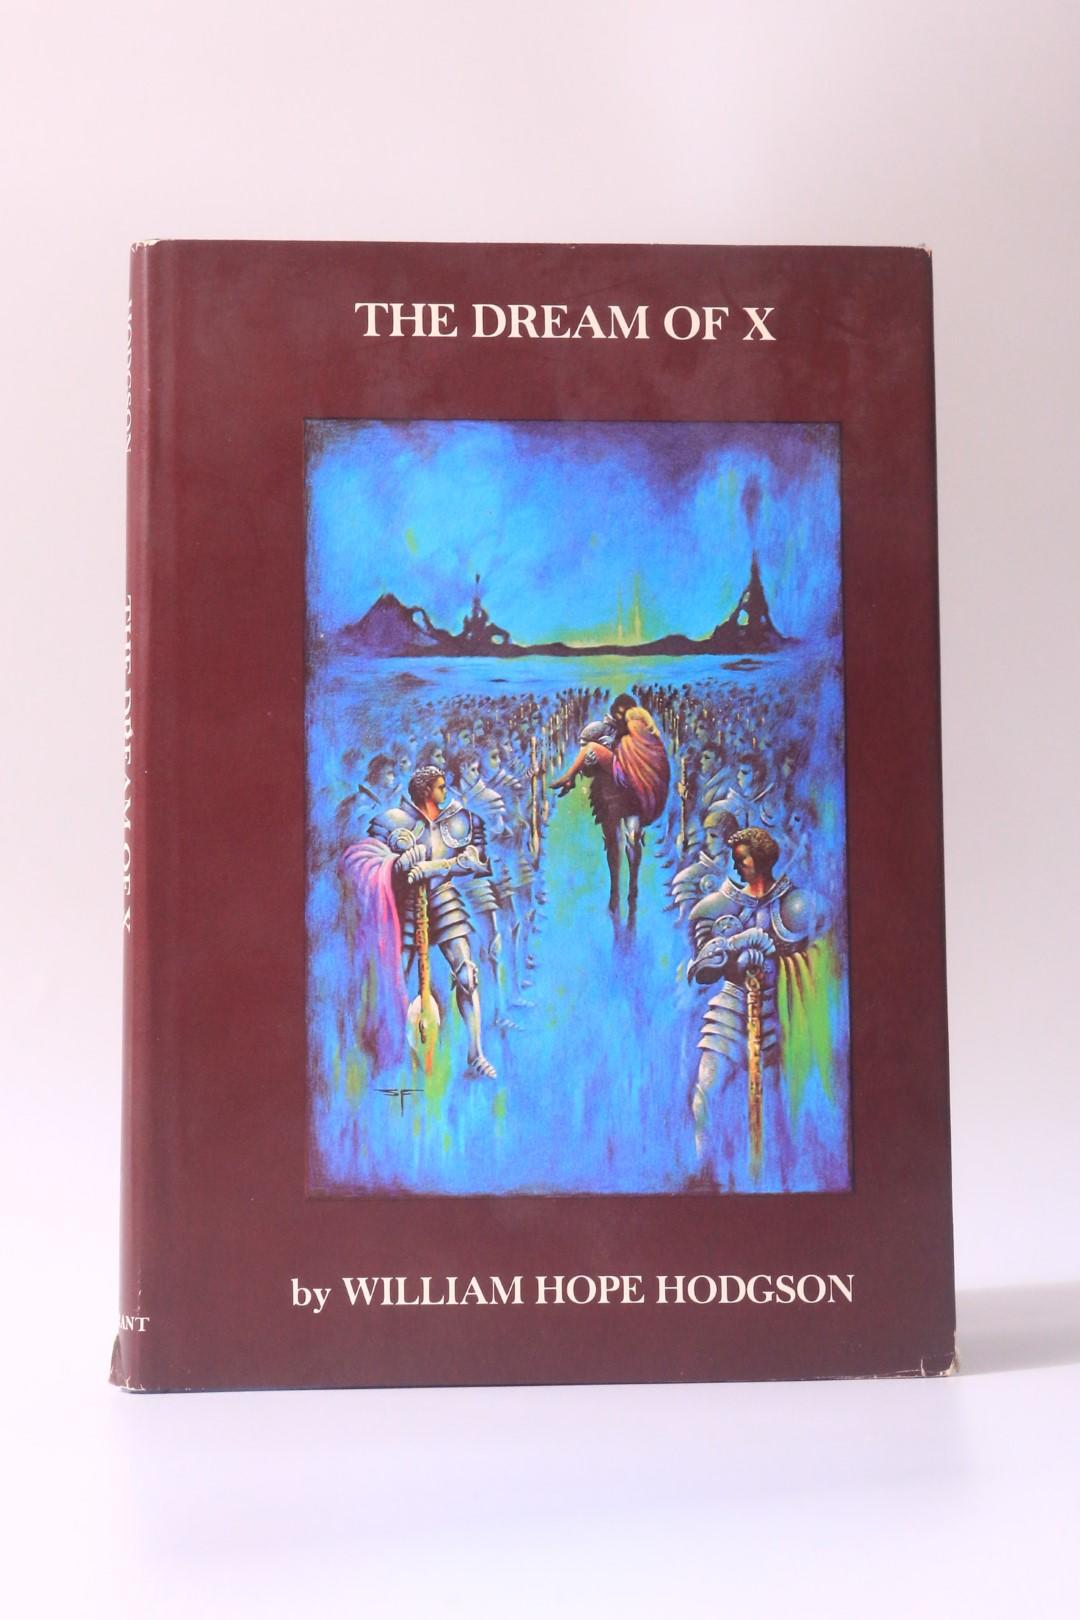 William Hope Hodgson - The Dream of X - Donald M. Grant, 1977, First Edition.